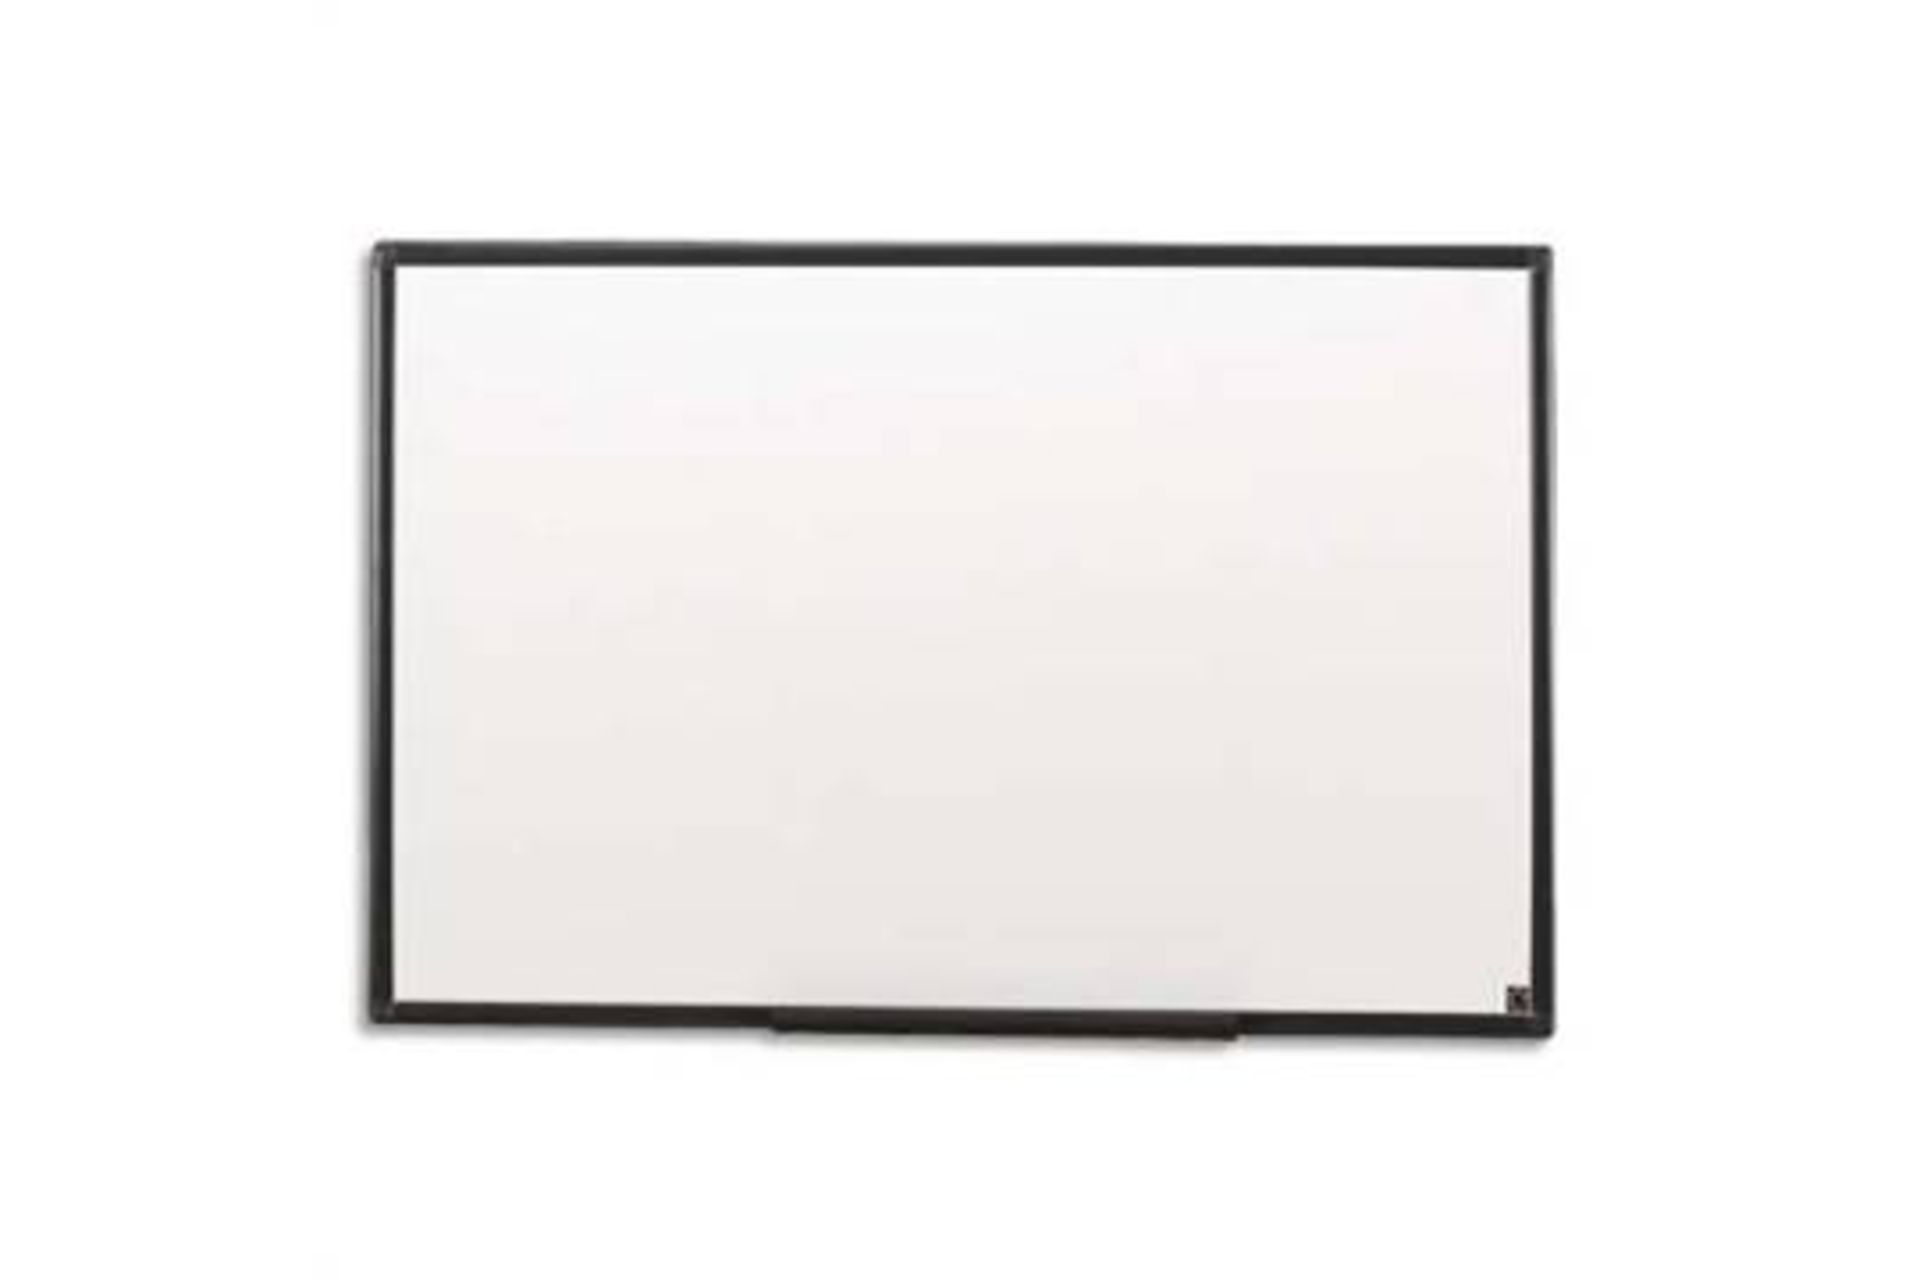 10 x 5 Star Drywipe Whiteboards With Fixing Kit/Pen Tray W600xH450mm (RRP £33.75 Each, £330+ in